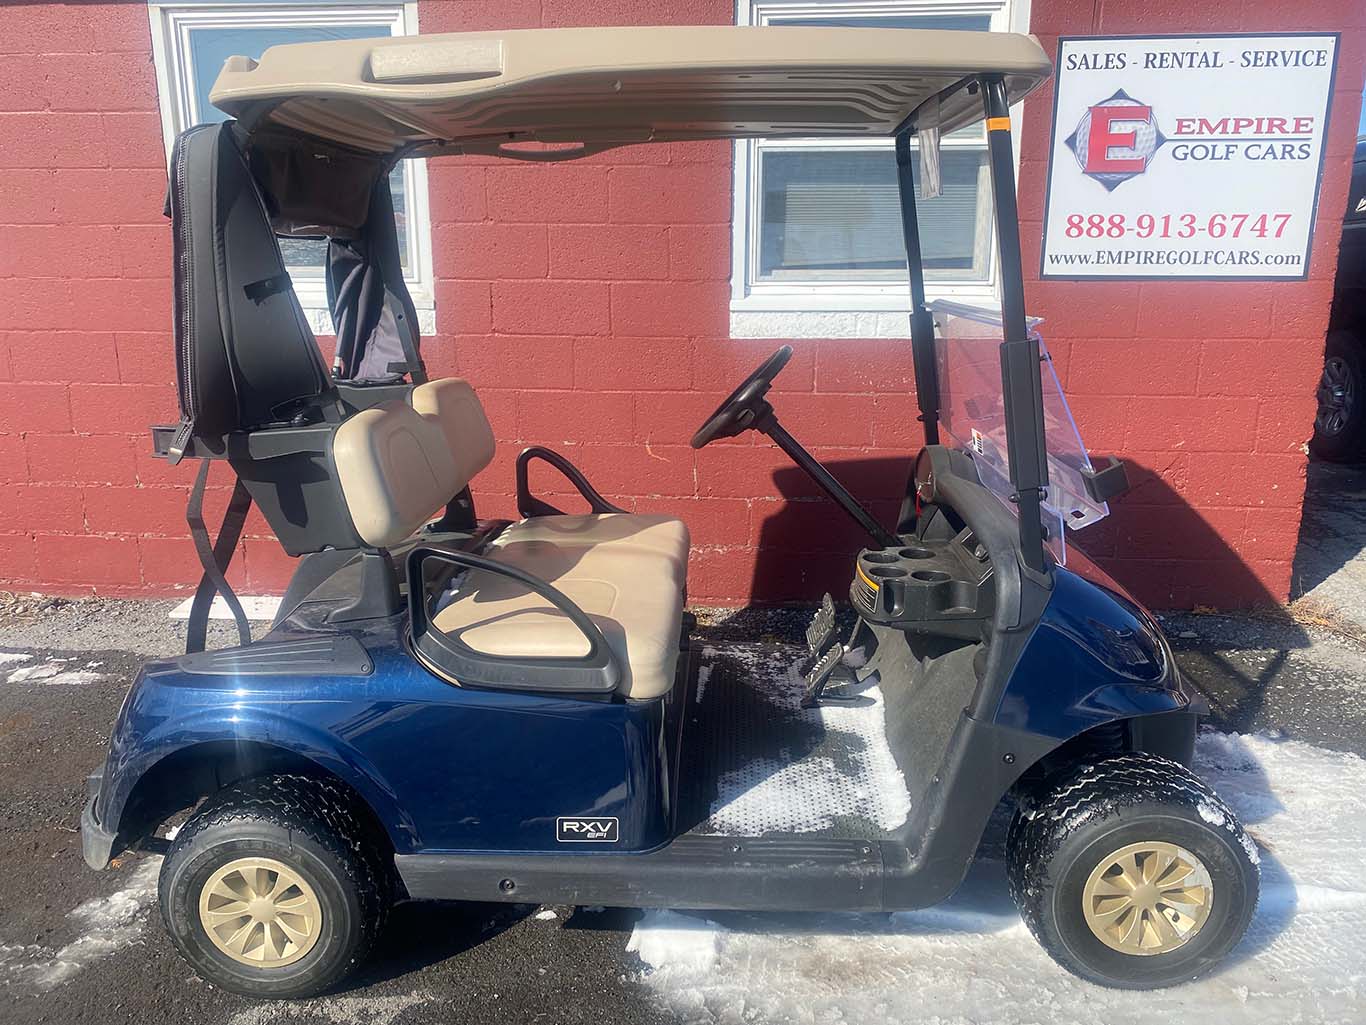 Golf Cart Rentals, NY | Empire Golf Cars Rental Program is here to serve  your needs near Ithaca, New York.